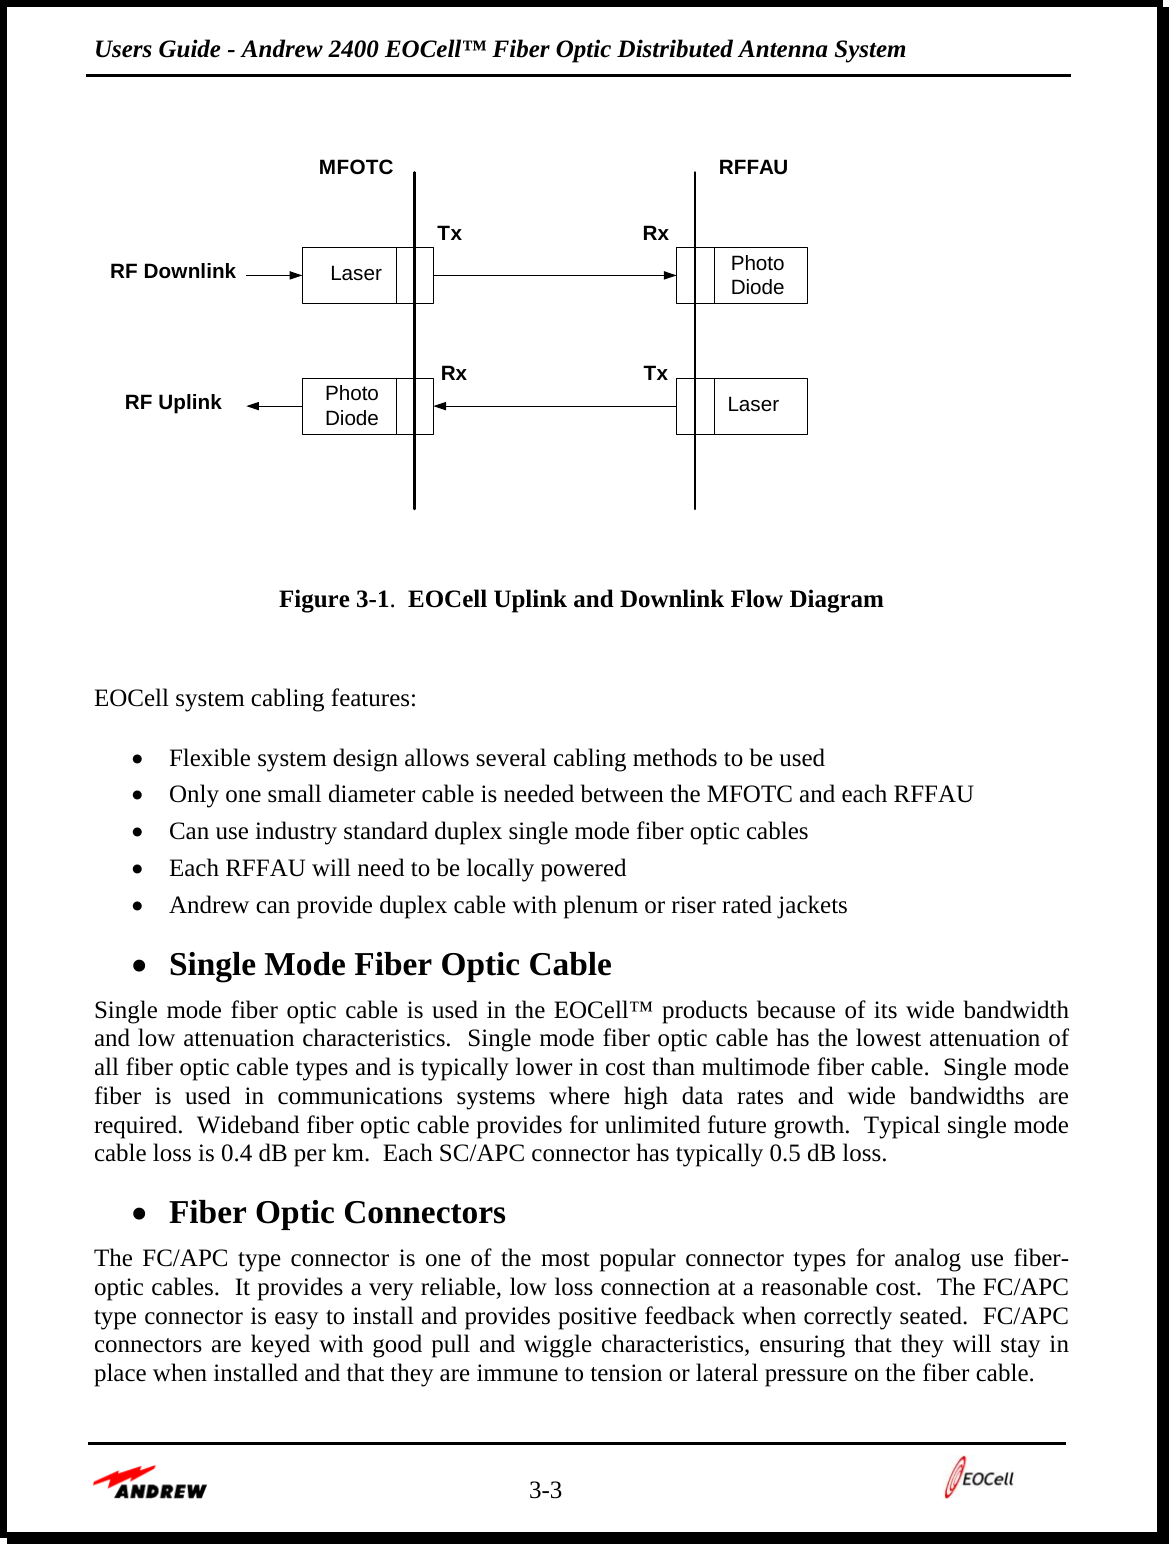 Users Guide - Andrew 2400 EOCell™ Fiber Optic Distributed Antenna System    3-3            Figure 3-1.  EOCell Uplink and Downlink Flow Diagram   EOCell system cabling features:  • Flexible system design allows several cabling methods to be used  • Only one small diameter cable is needed between the MFOTC and each RFFAU • Can use industry standard duplex single mode fiber optic cables • Each RFFAU will need to be locally powered • Andrew can provide duplex cable with plenum or riser rated jackets • Single Mode Fiber Optic Cable Single mode fiber optic cable is used in the EOCell™ products because of its wide bandwidth and low attenuation characteristics.  Single mode fiber optic cable has the lowest attenuation of all fiber optic cable types and is typically lower in cost than multimode fiber cable.  Single mode fiber is used in communications systems where high data rates and wide bandwidths are required.  Wideband fiber optic cable provides for unlimited future growth.  Typical single mode cable loss is 0.4 dB per km.  Each SC/APC connector has typically 0.5 dB loss. • Fiber Optic Connectors The FC/APC type connector is one of the most popular connector types for analog use fiber-optic cables.  It provides a very reliable, low loss connection at a reasonable cost.  The FC/APC type connector is easy to install and provides positive feedback when correctly seated.  FC/APC connectors are keyed with good pull and wiggle characteristics, ensuring that they will stay in place when installed and that they are immune to tension or lateral pressure on the fiber cable.  PhotoDiode LaserPhotoDiodeRF DownlinkRF UplinkTx RxMFOTC RFFAULaserRx Tx